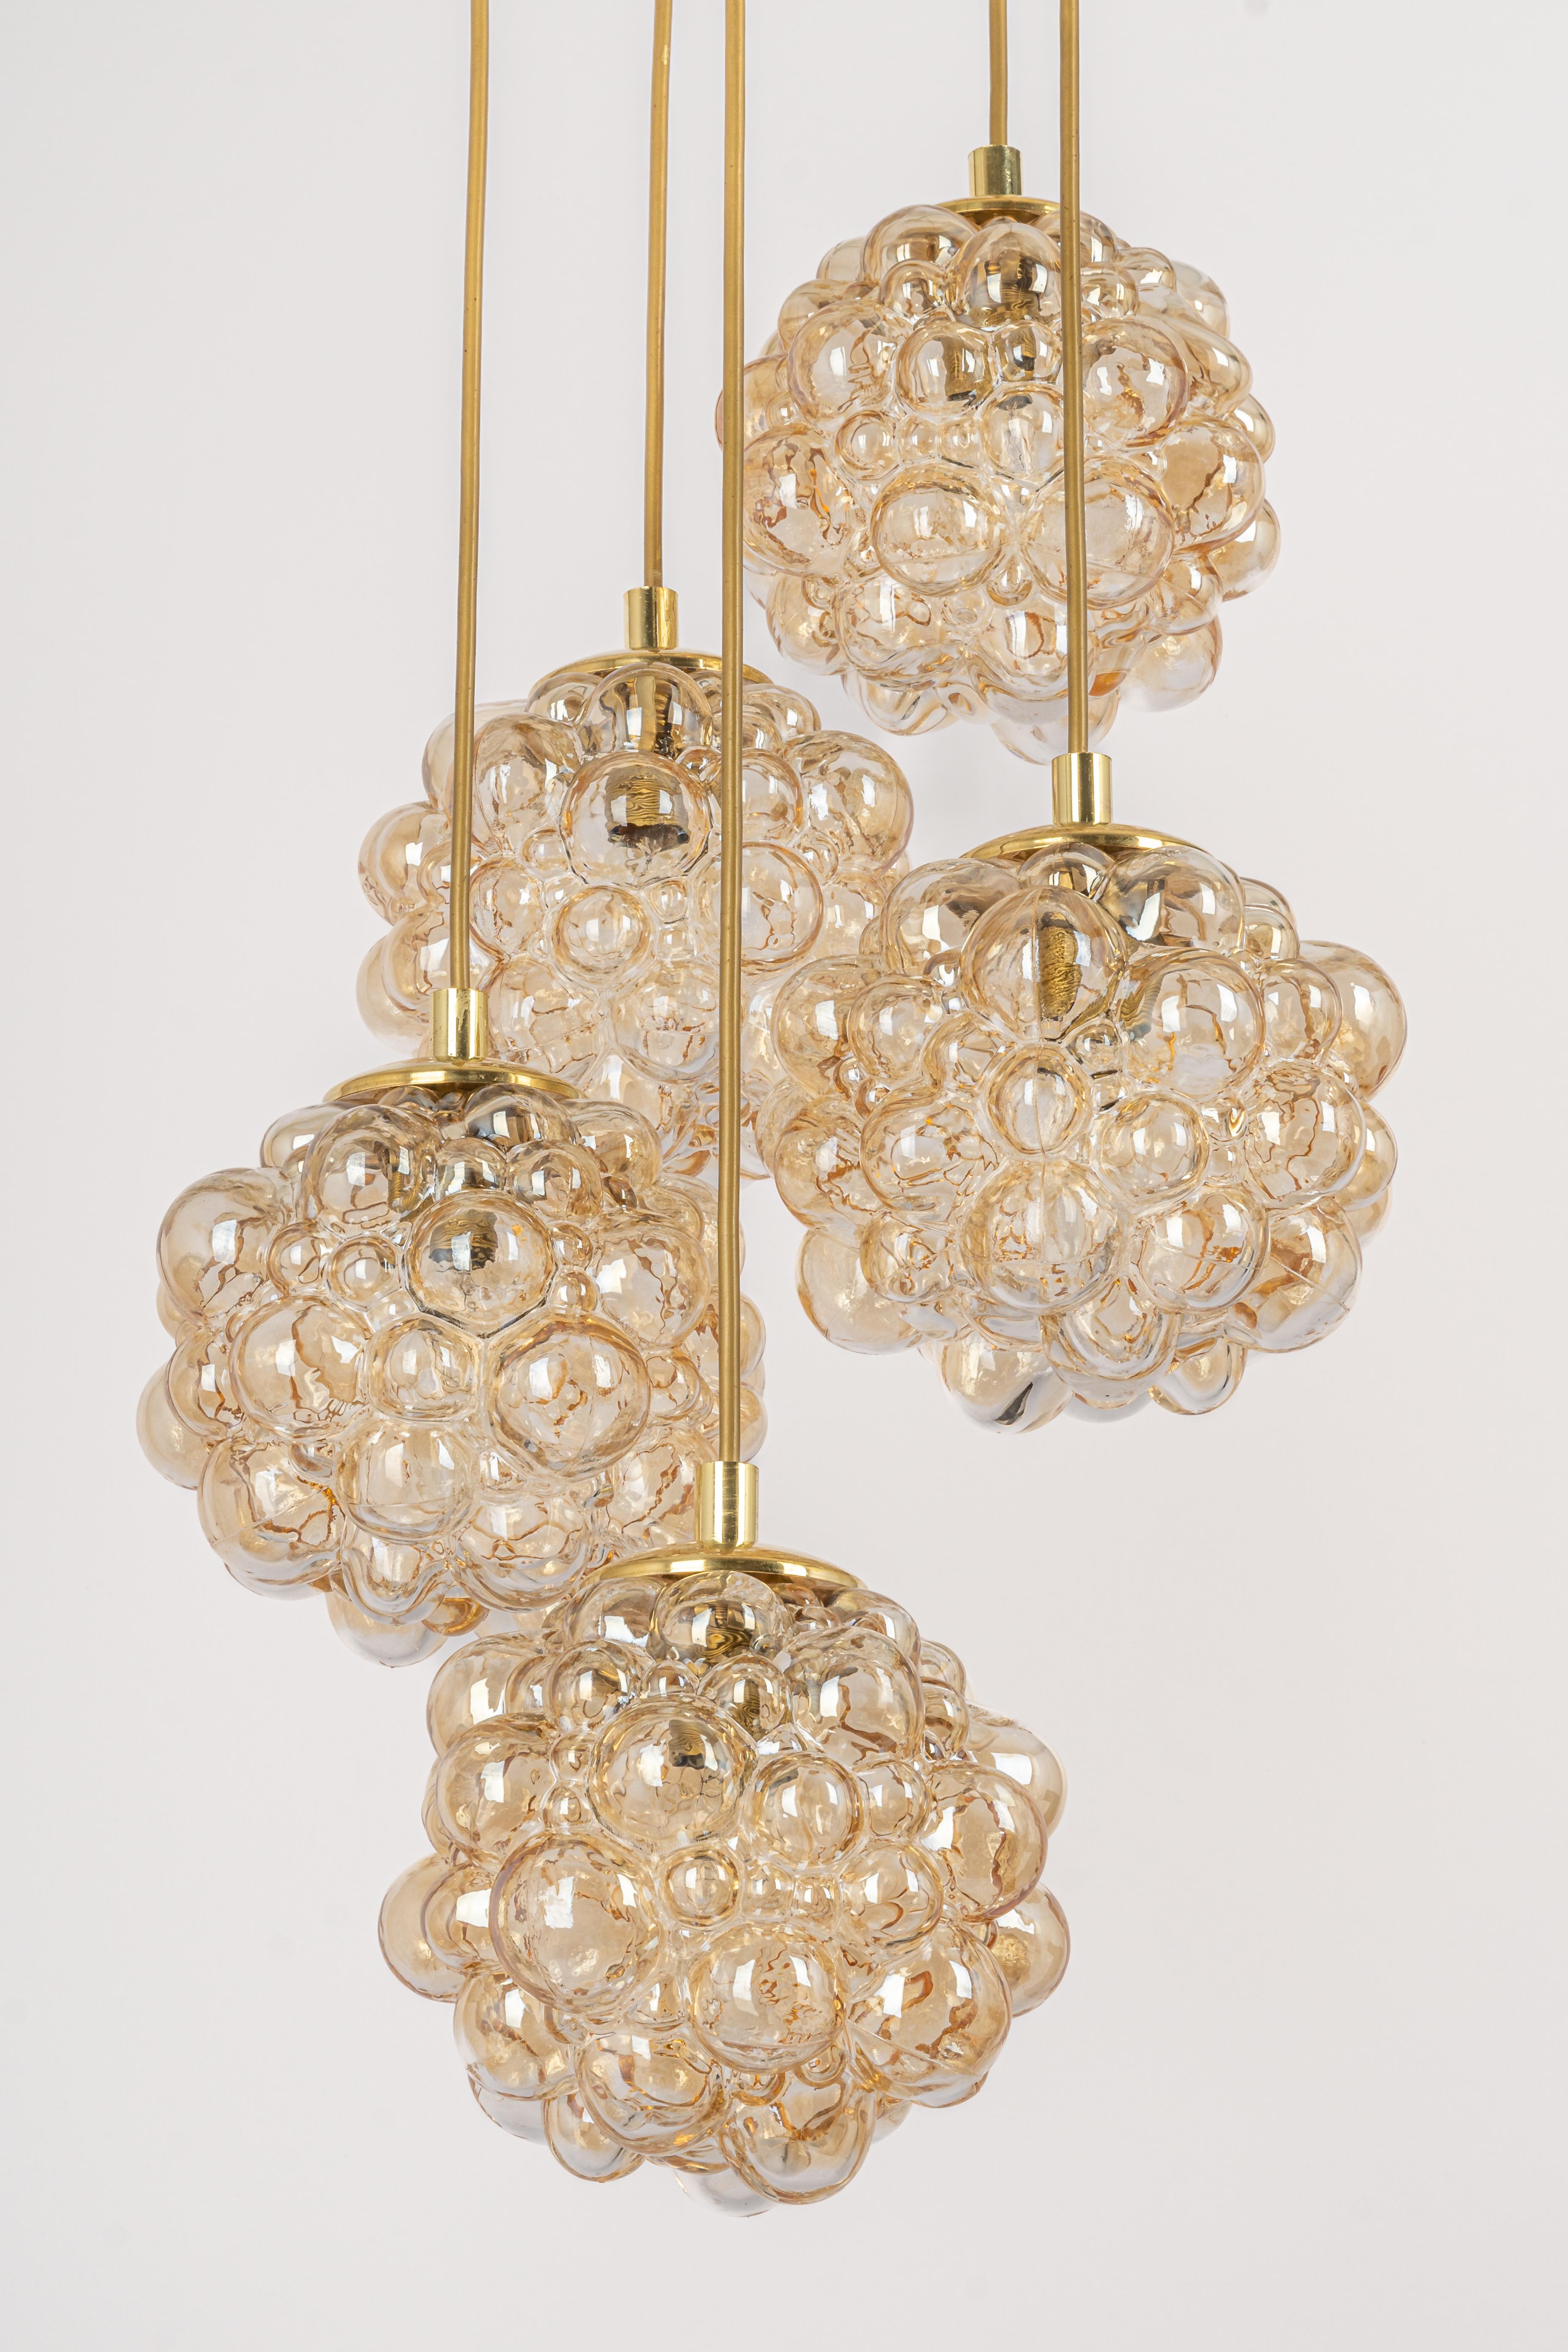 A special large cascading chandelier by Limburg, manufactured in Germany, circa the 1970s with 5 bubble glasses.
Wonderful form and stunning light effect.
Sockets: 5 x E14 small bulb. (40 W max)
Light bulbs are not included. It is possible to